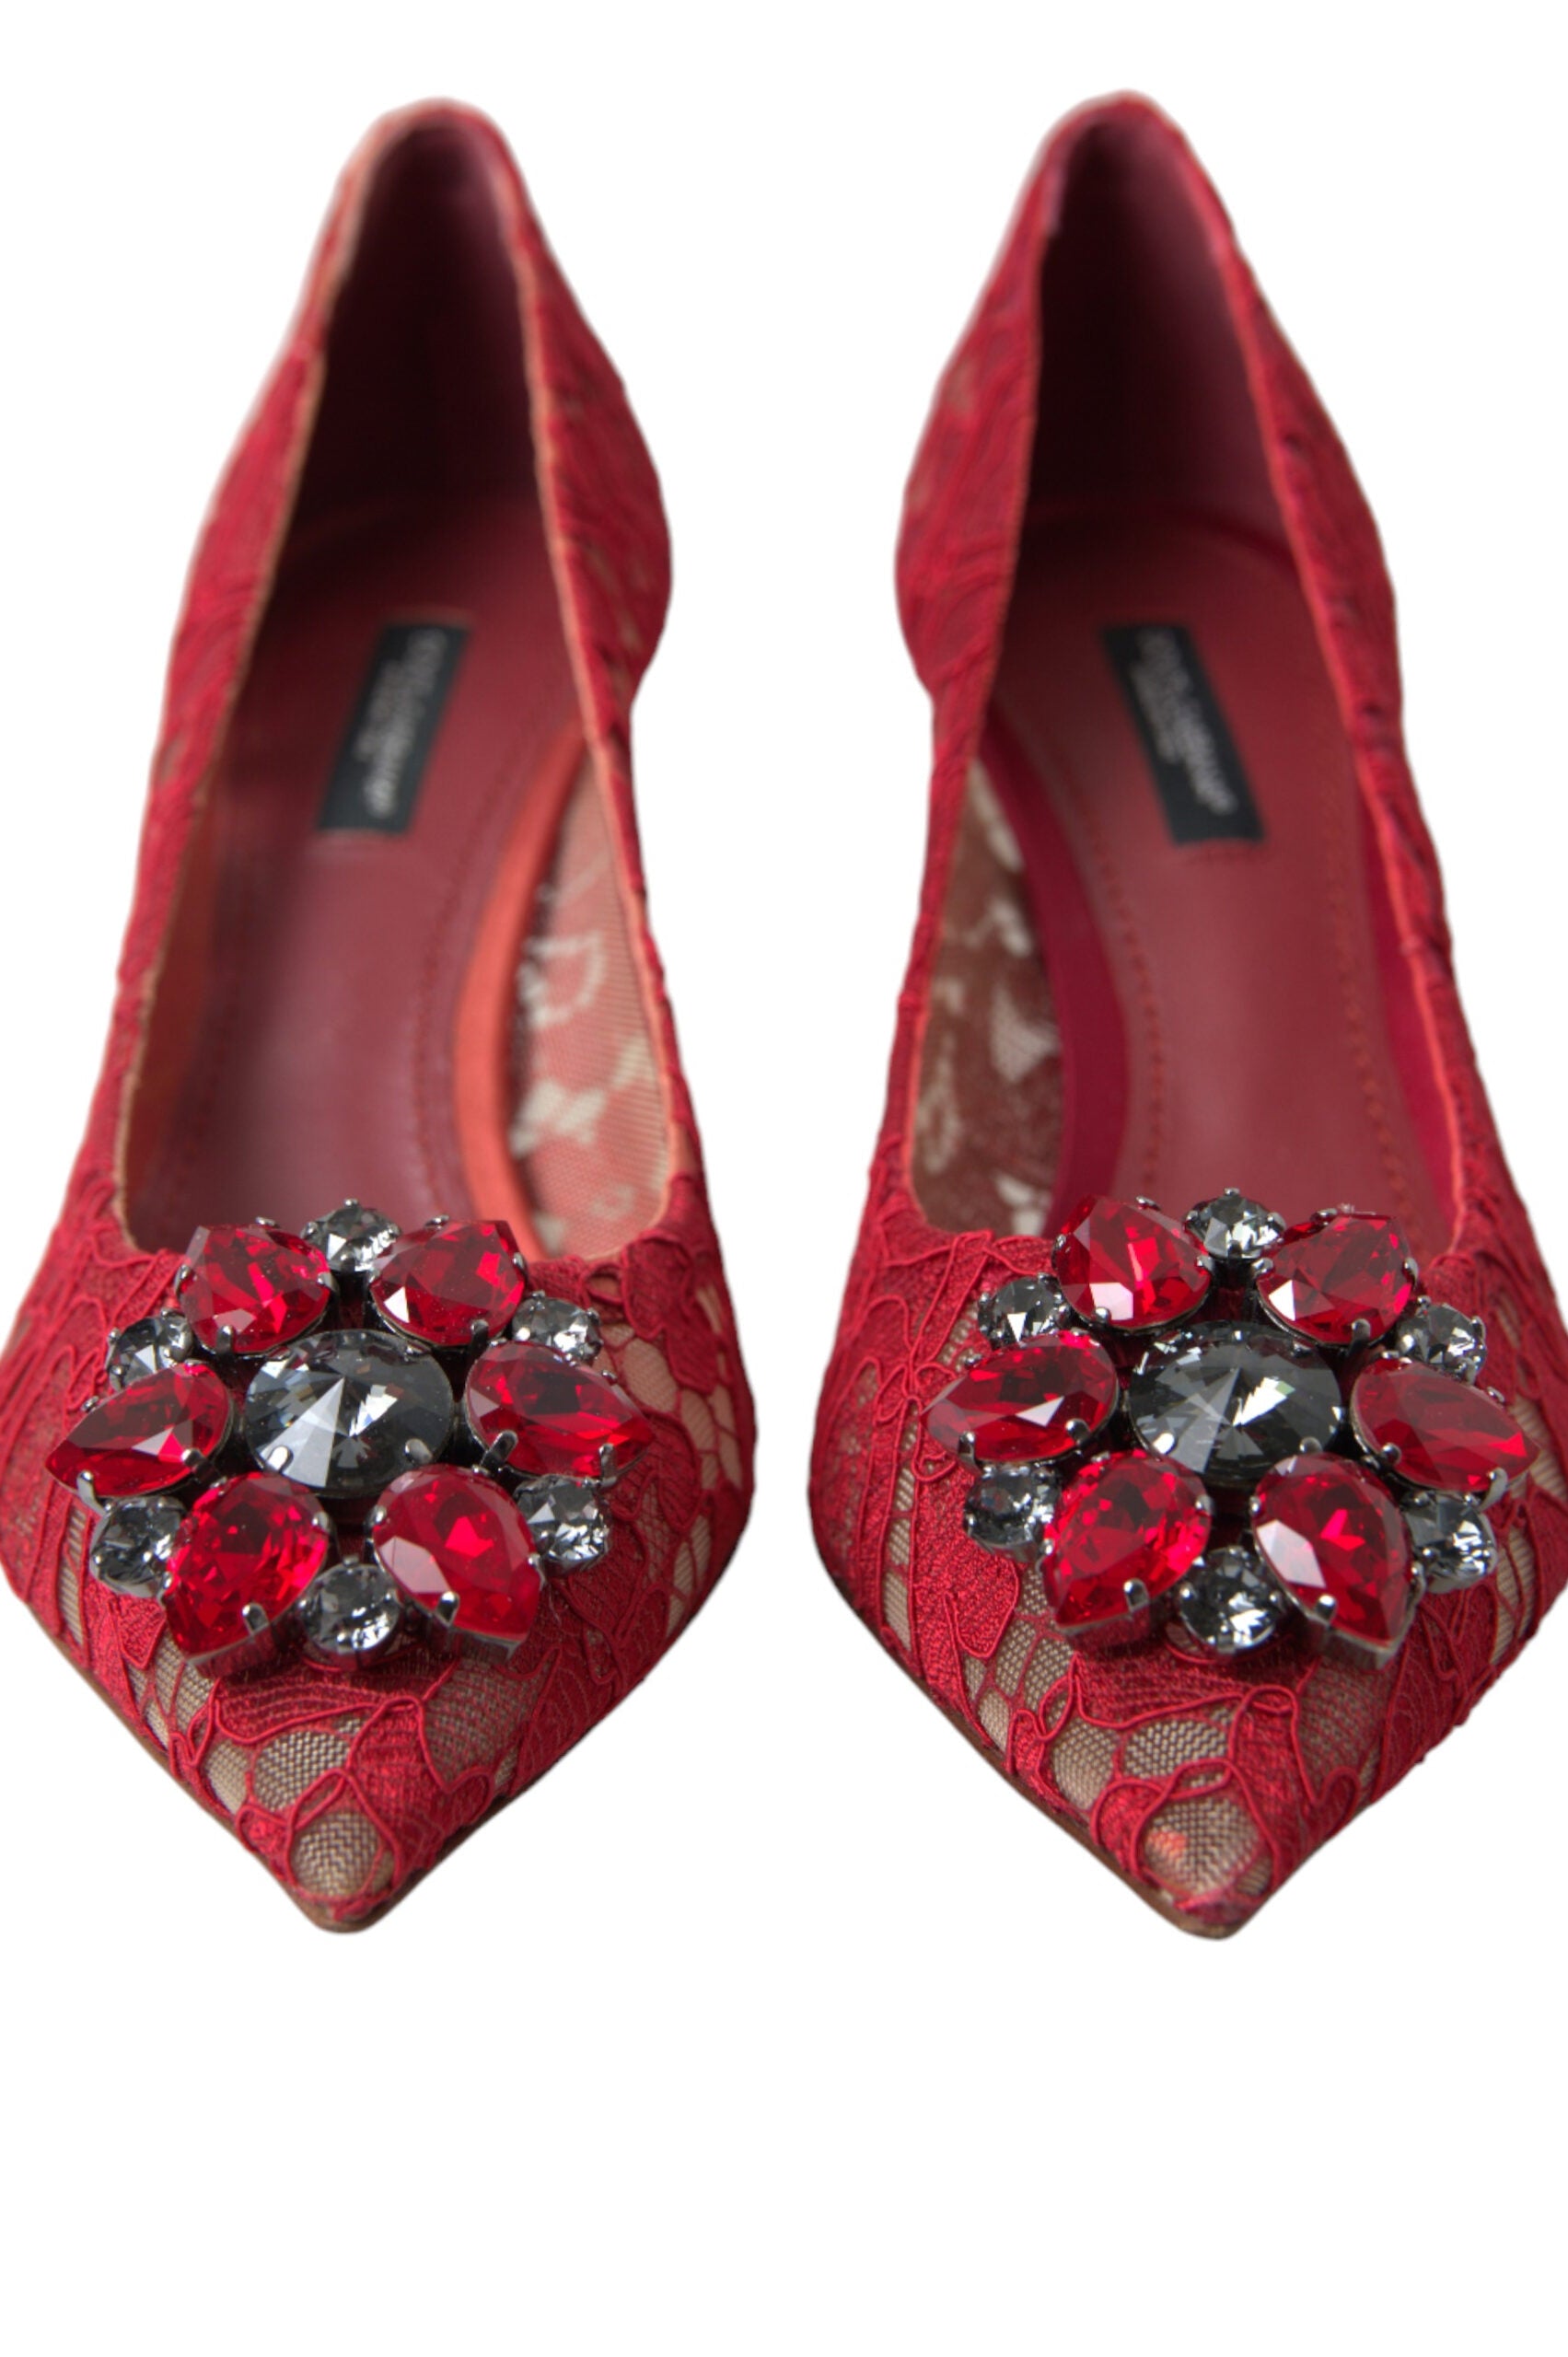 Dolce & Gabbana Red Taormina Lace Crystal Heels Pumps Shoes GENUINE AUTHENTIC BRAND LLC